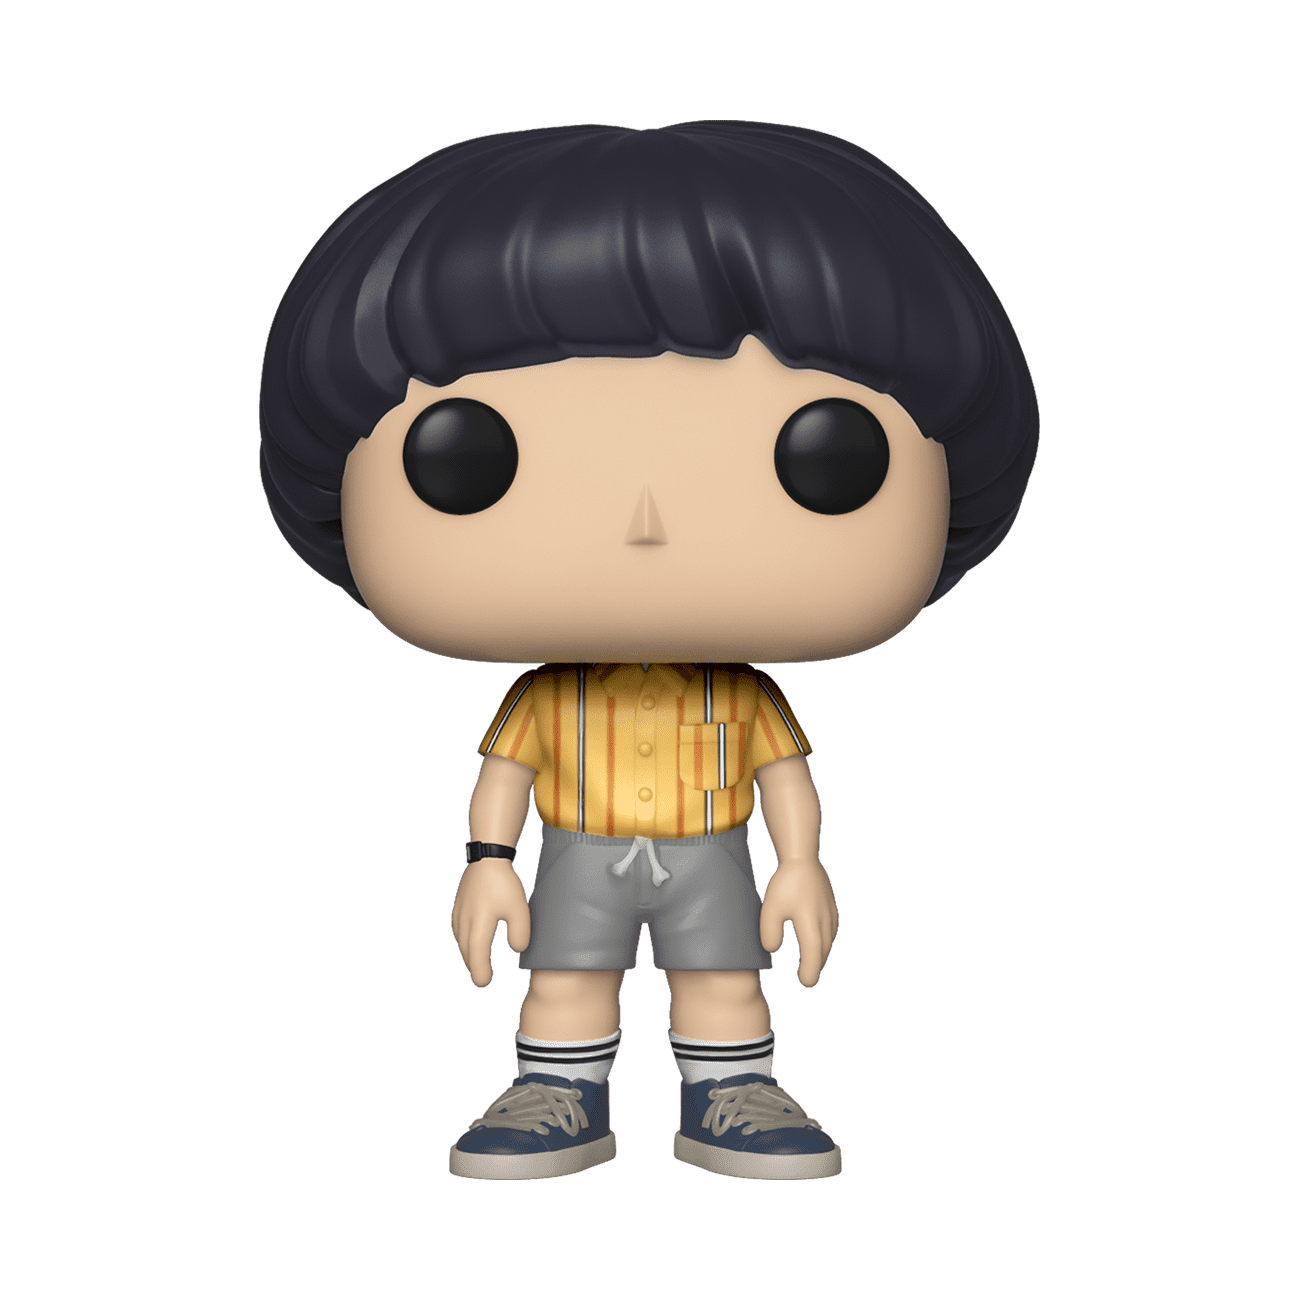 Mike with Walkie Talkie Official Stranger Things Funko Pop Vinyl Figure Toy 